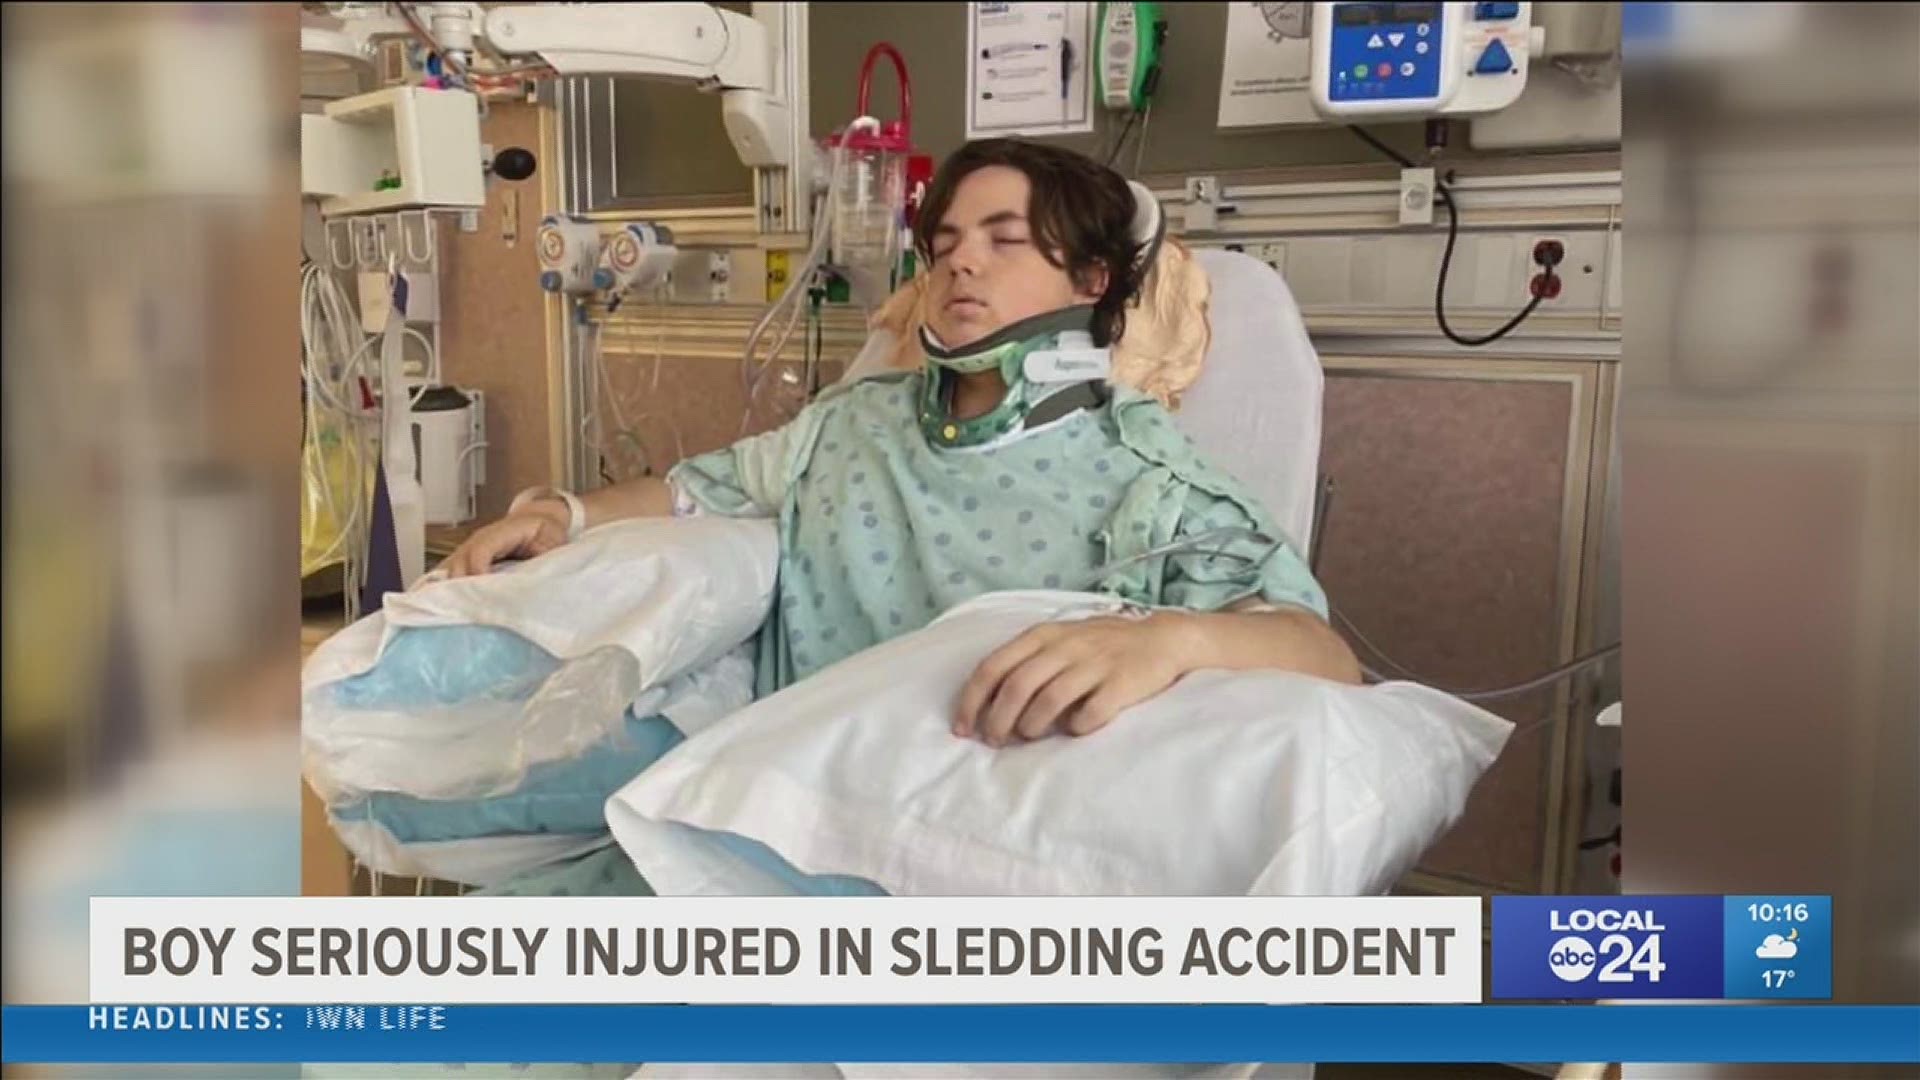 The family of a teen left with puncture lungs after sledding accident is grateful for outpouring of support from strangers.